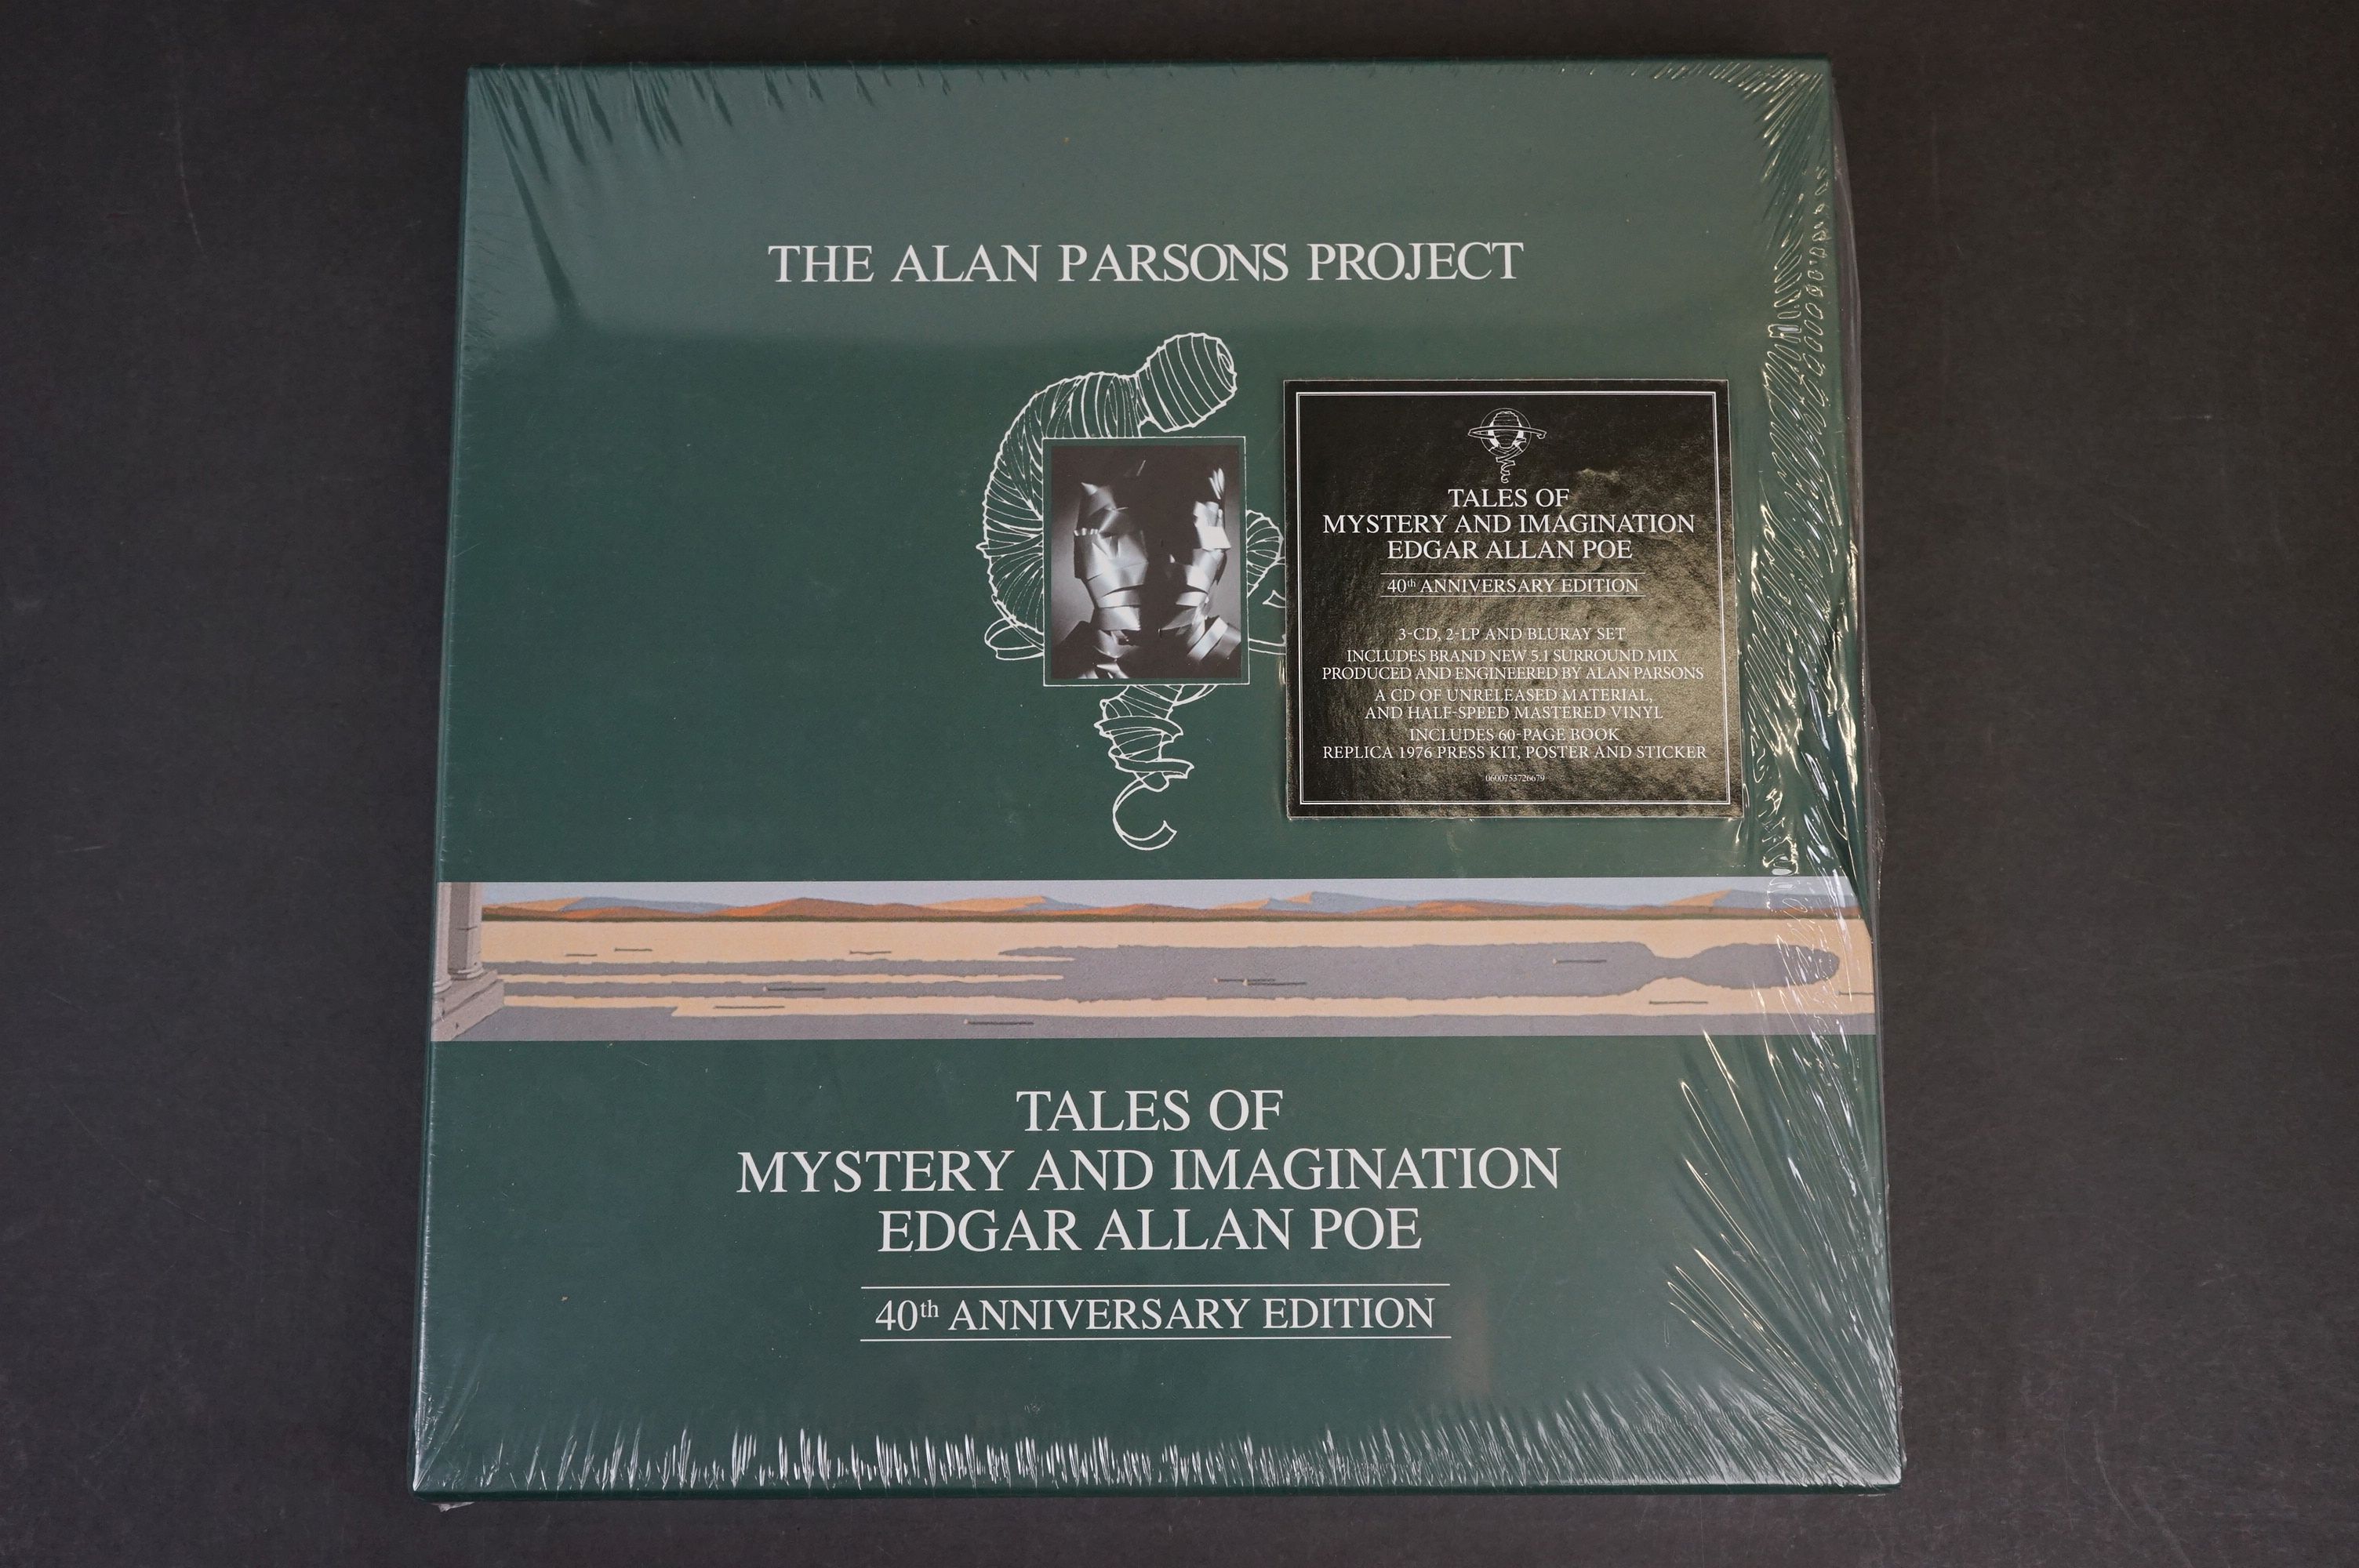 Vinyl / CD / Bluray DVD - The Alan Parsons Project Tales of Mystery and Imagination Edgar Allan